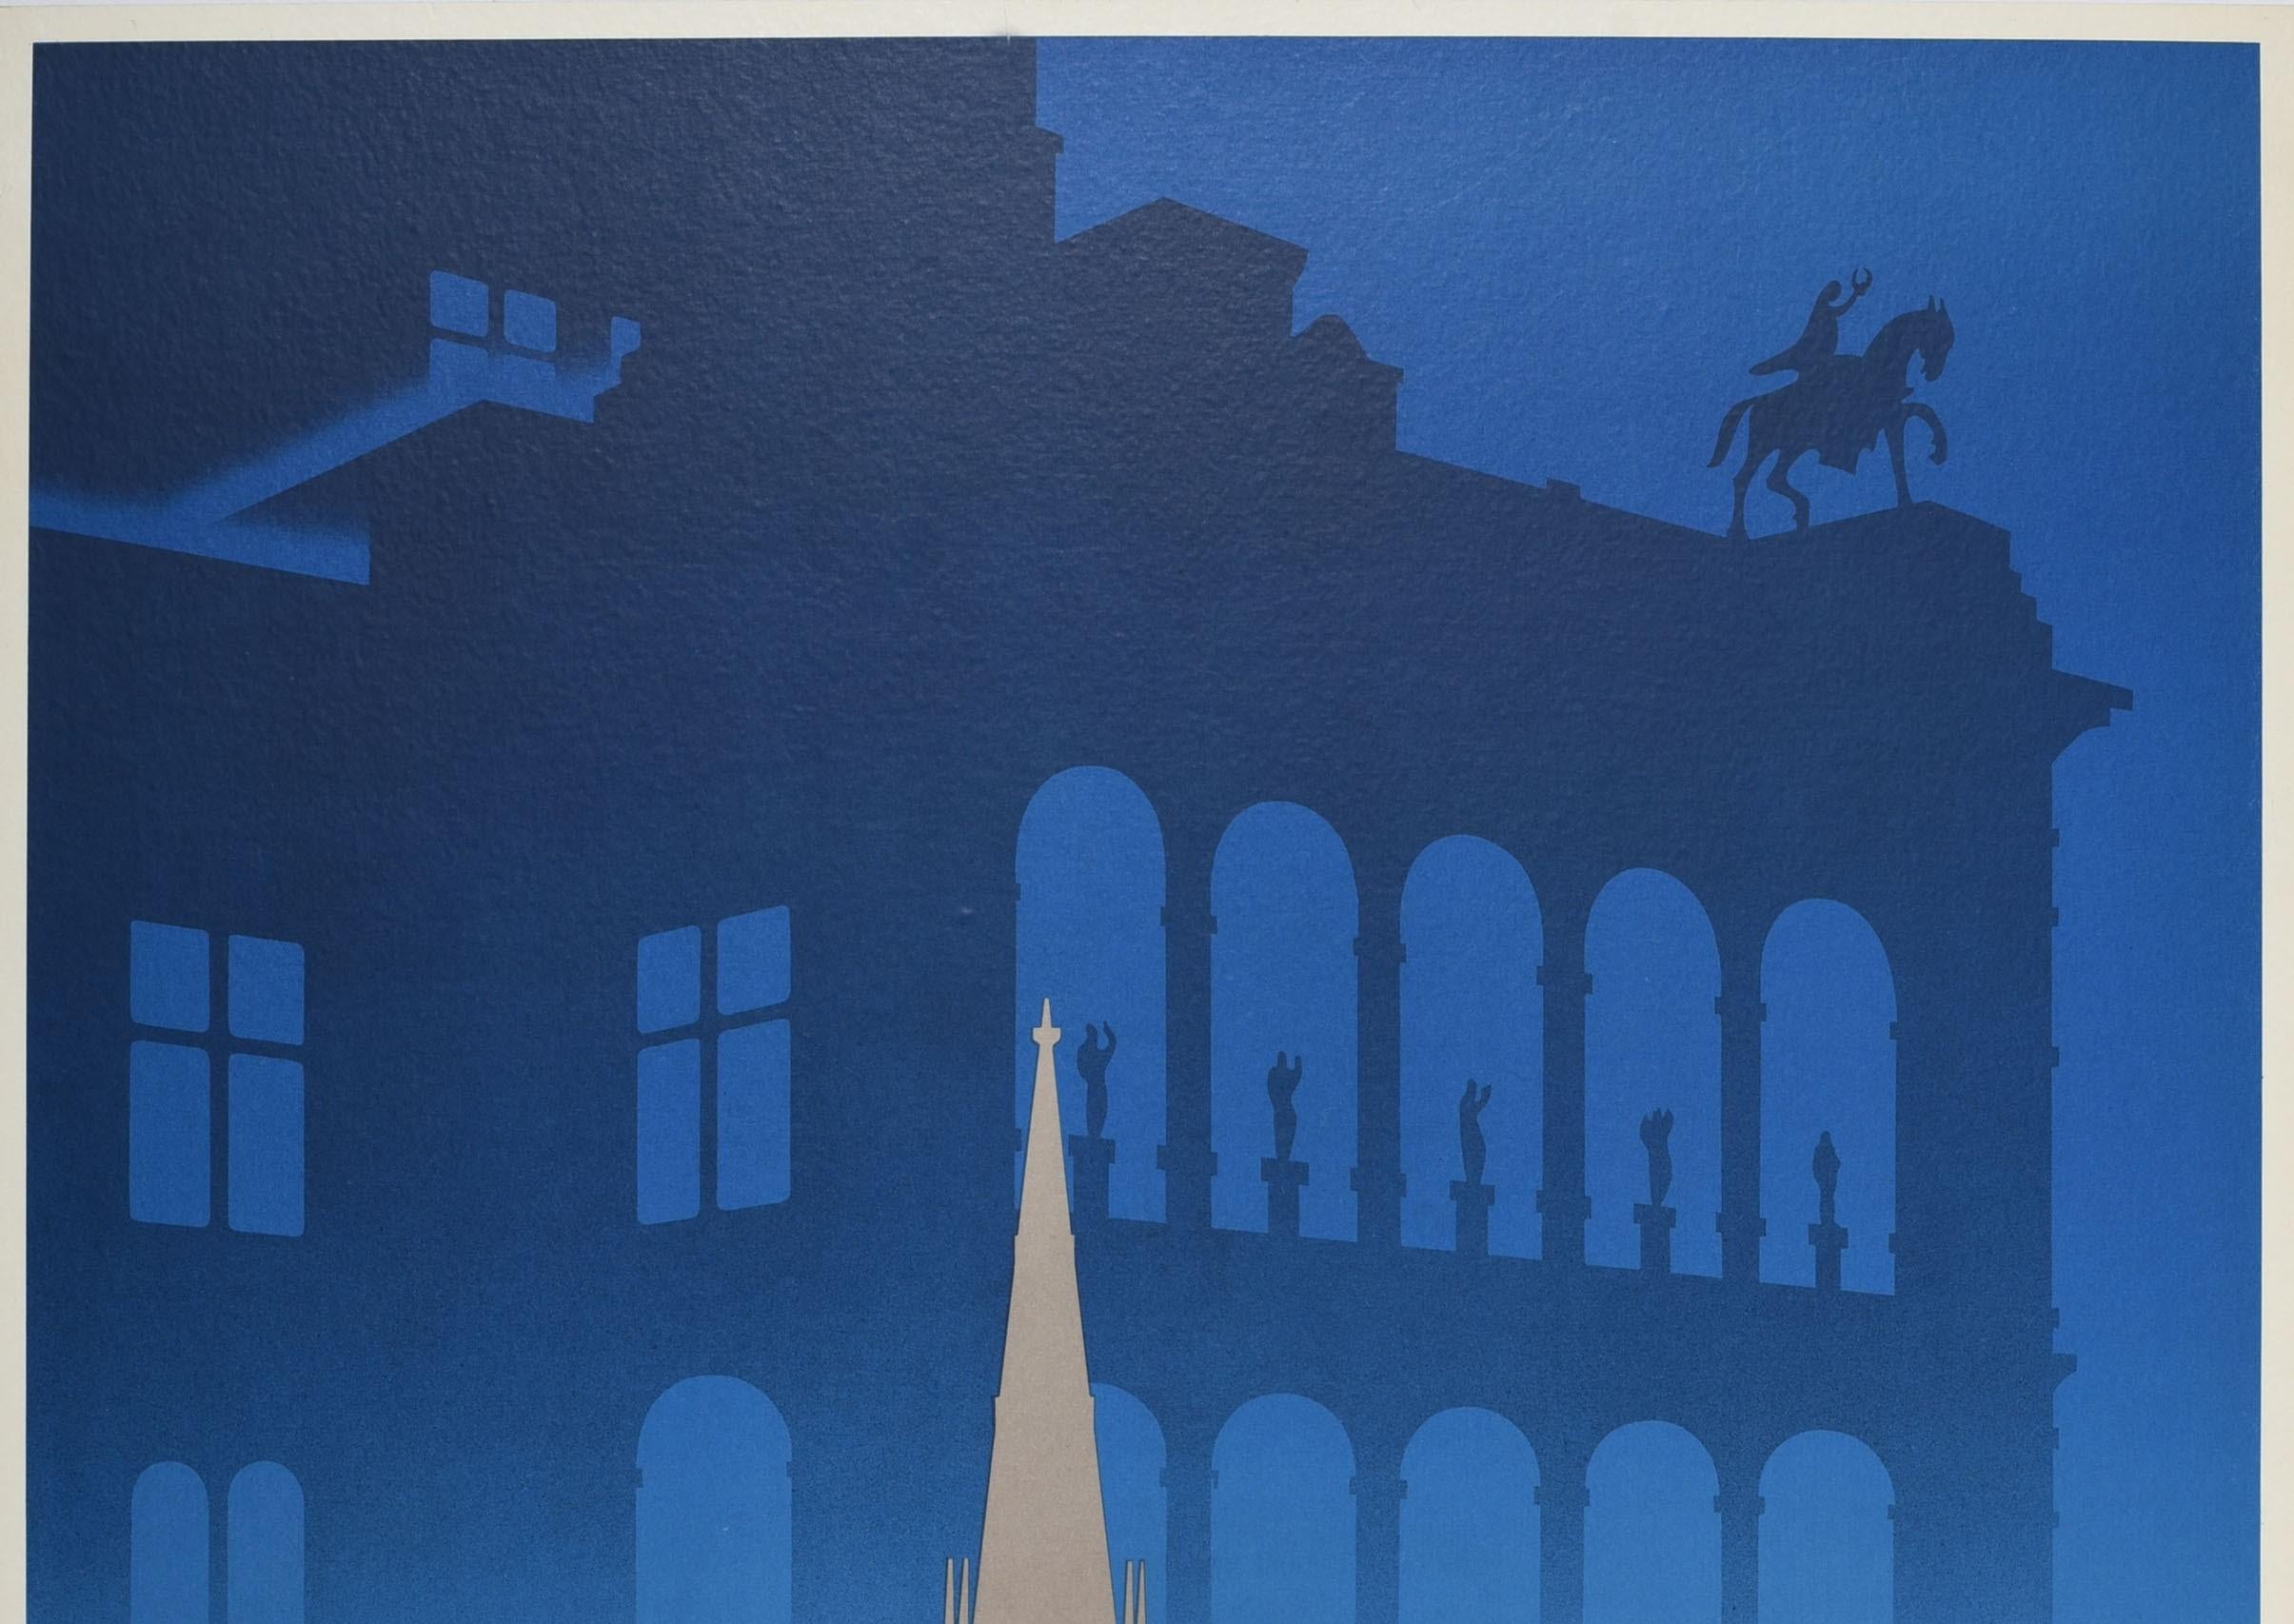 Original vintage travel poster - To Vienna by train and post / Nach Wien Mit Bahn Und Post - featuring a stunning design showing a silhouette of an historic building and statue of a person riding a horse on the deep blue night sky background with